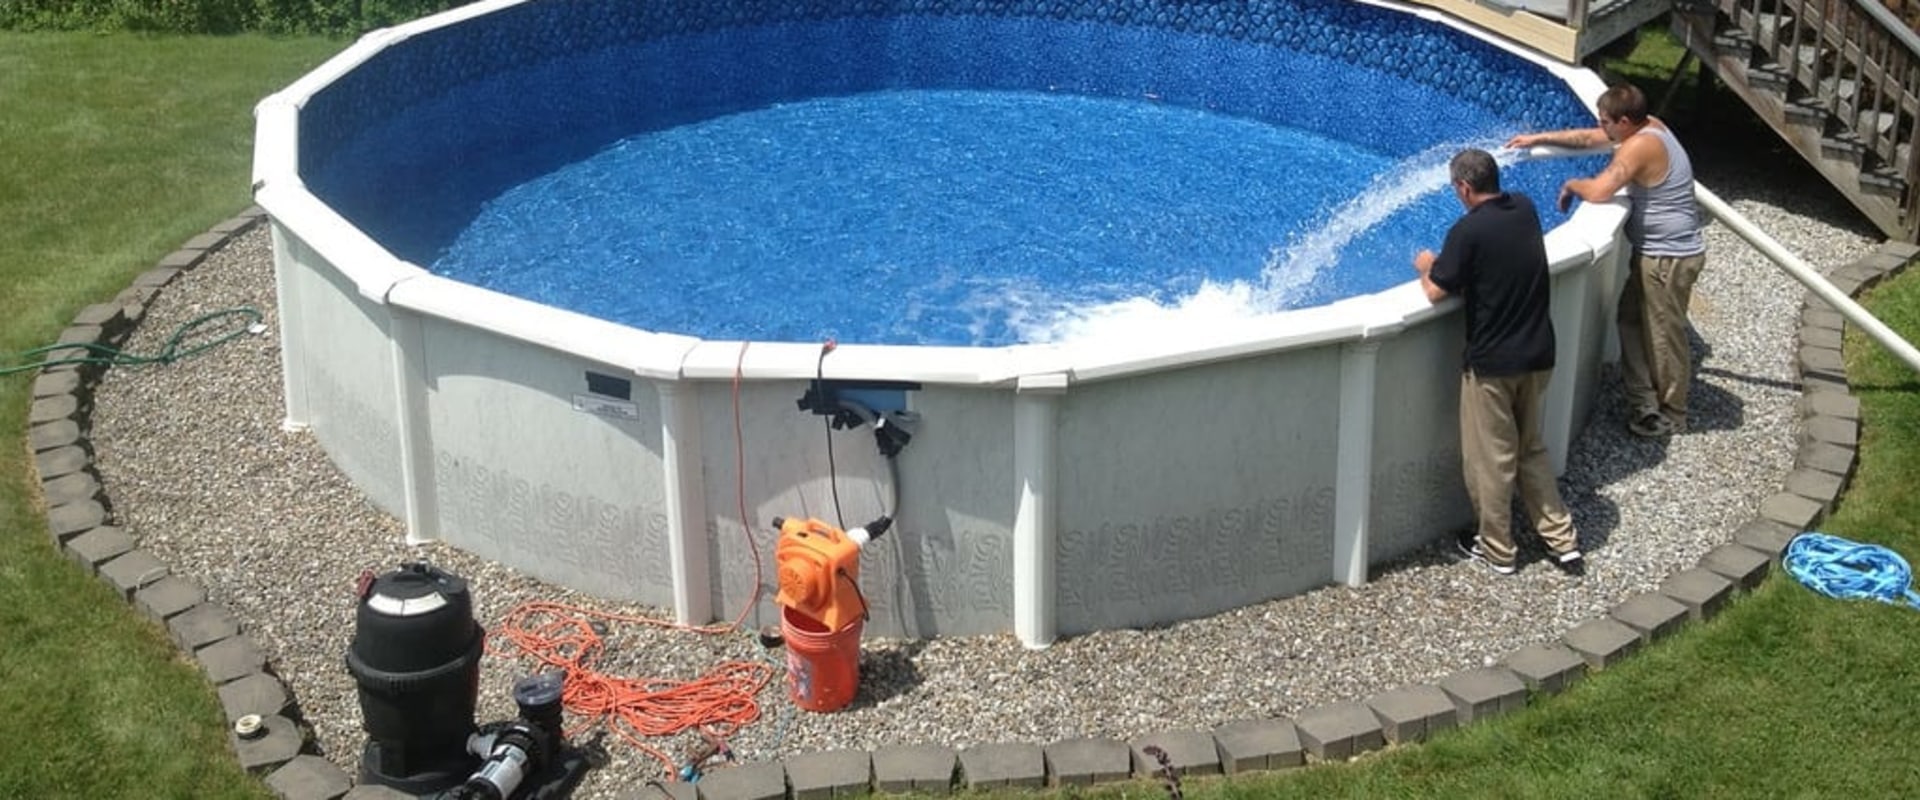 How do you landscape where an above ground pool was?